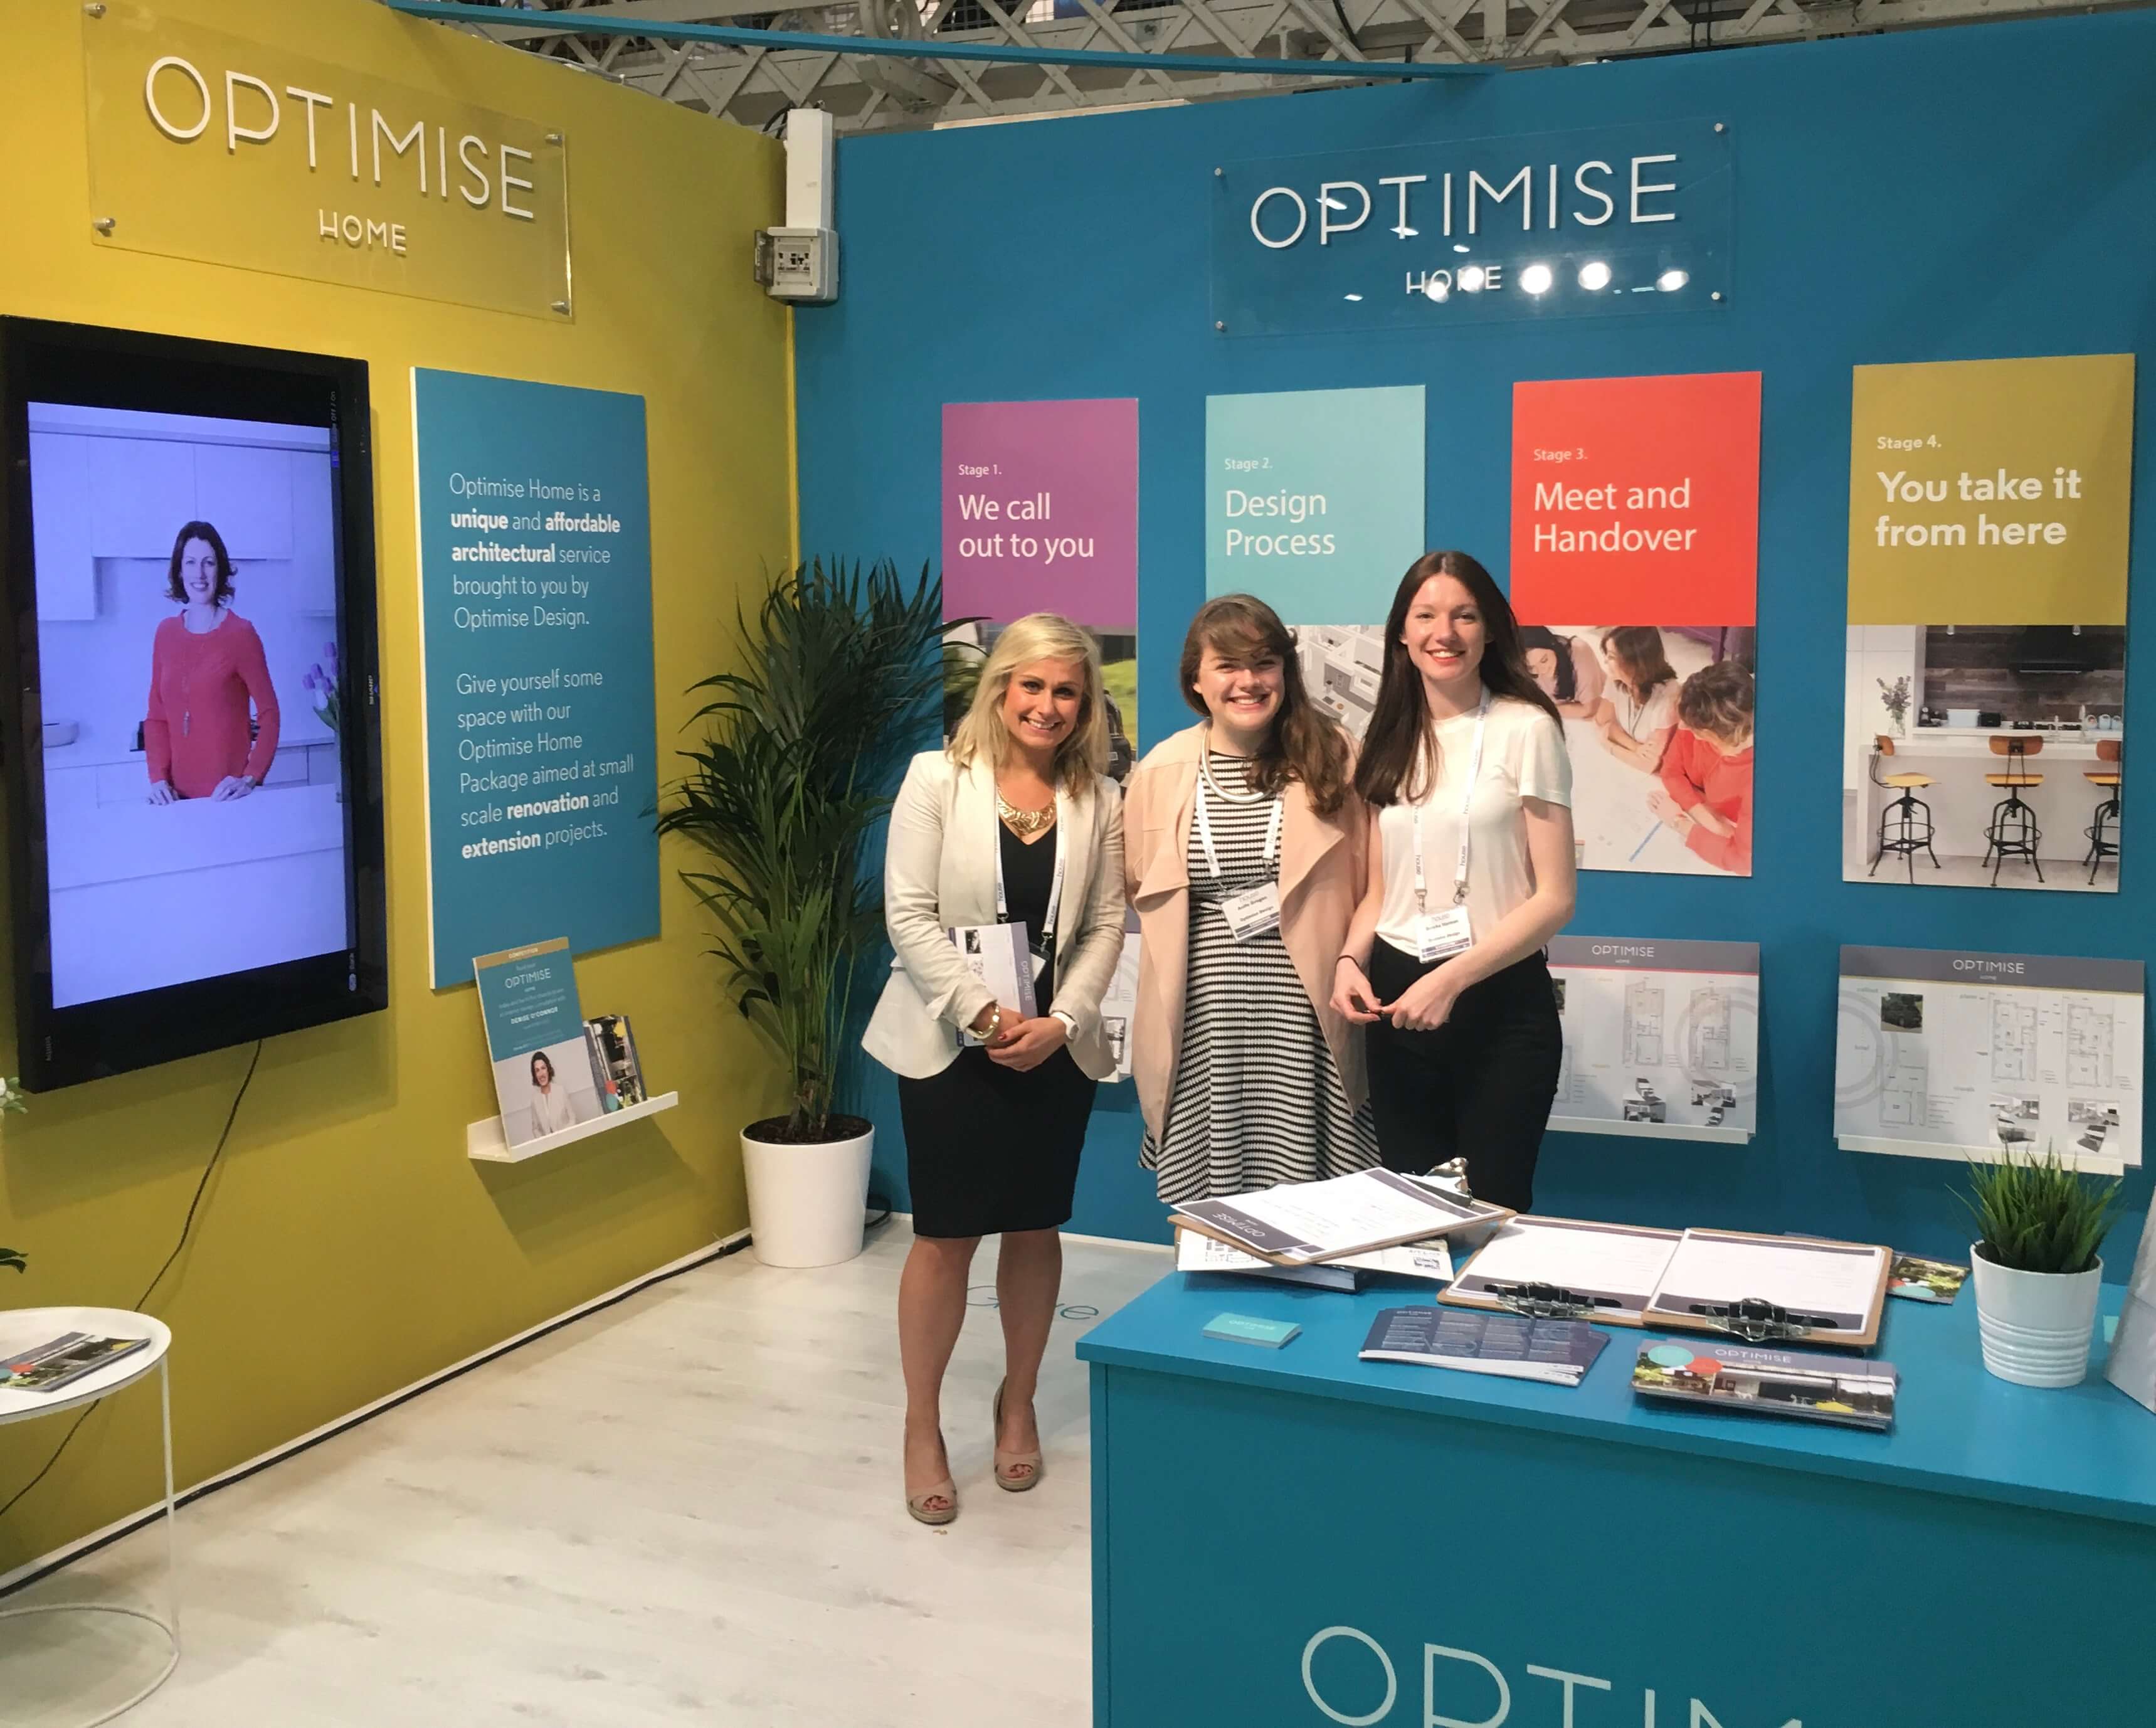 Meet Optimise Home at the ideal home show